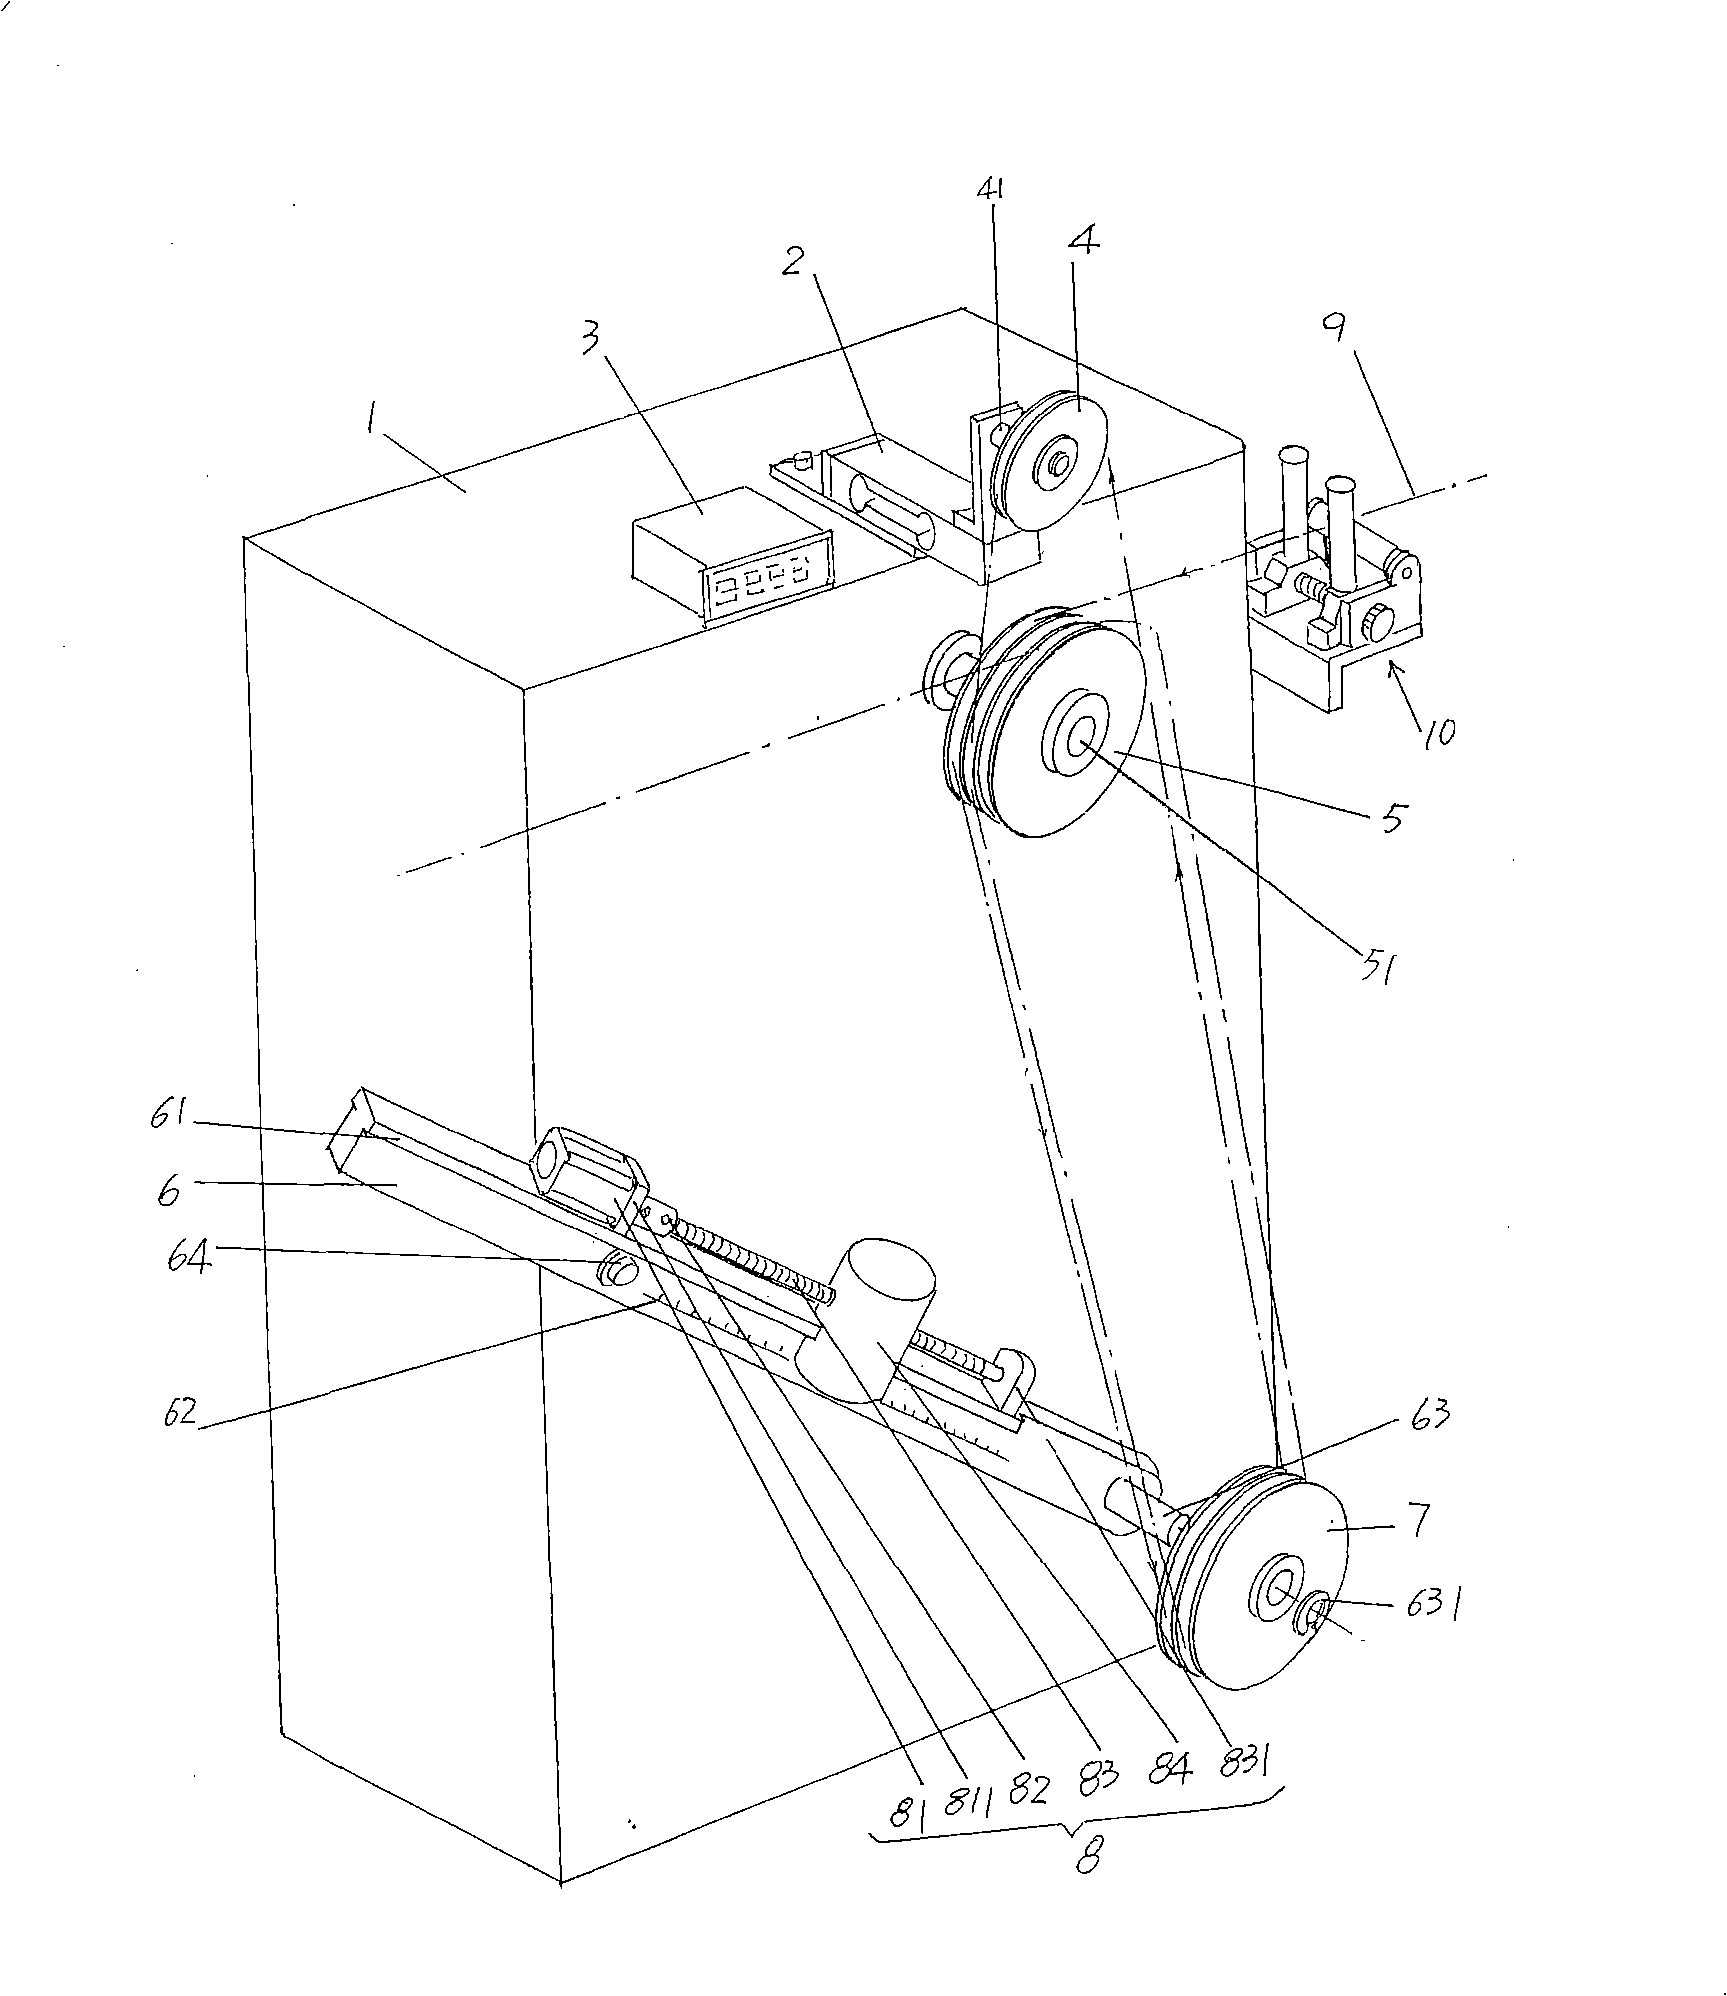 Apparatus for automatically regulating tension of conductor